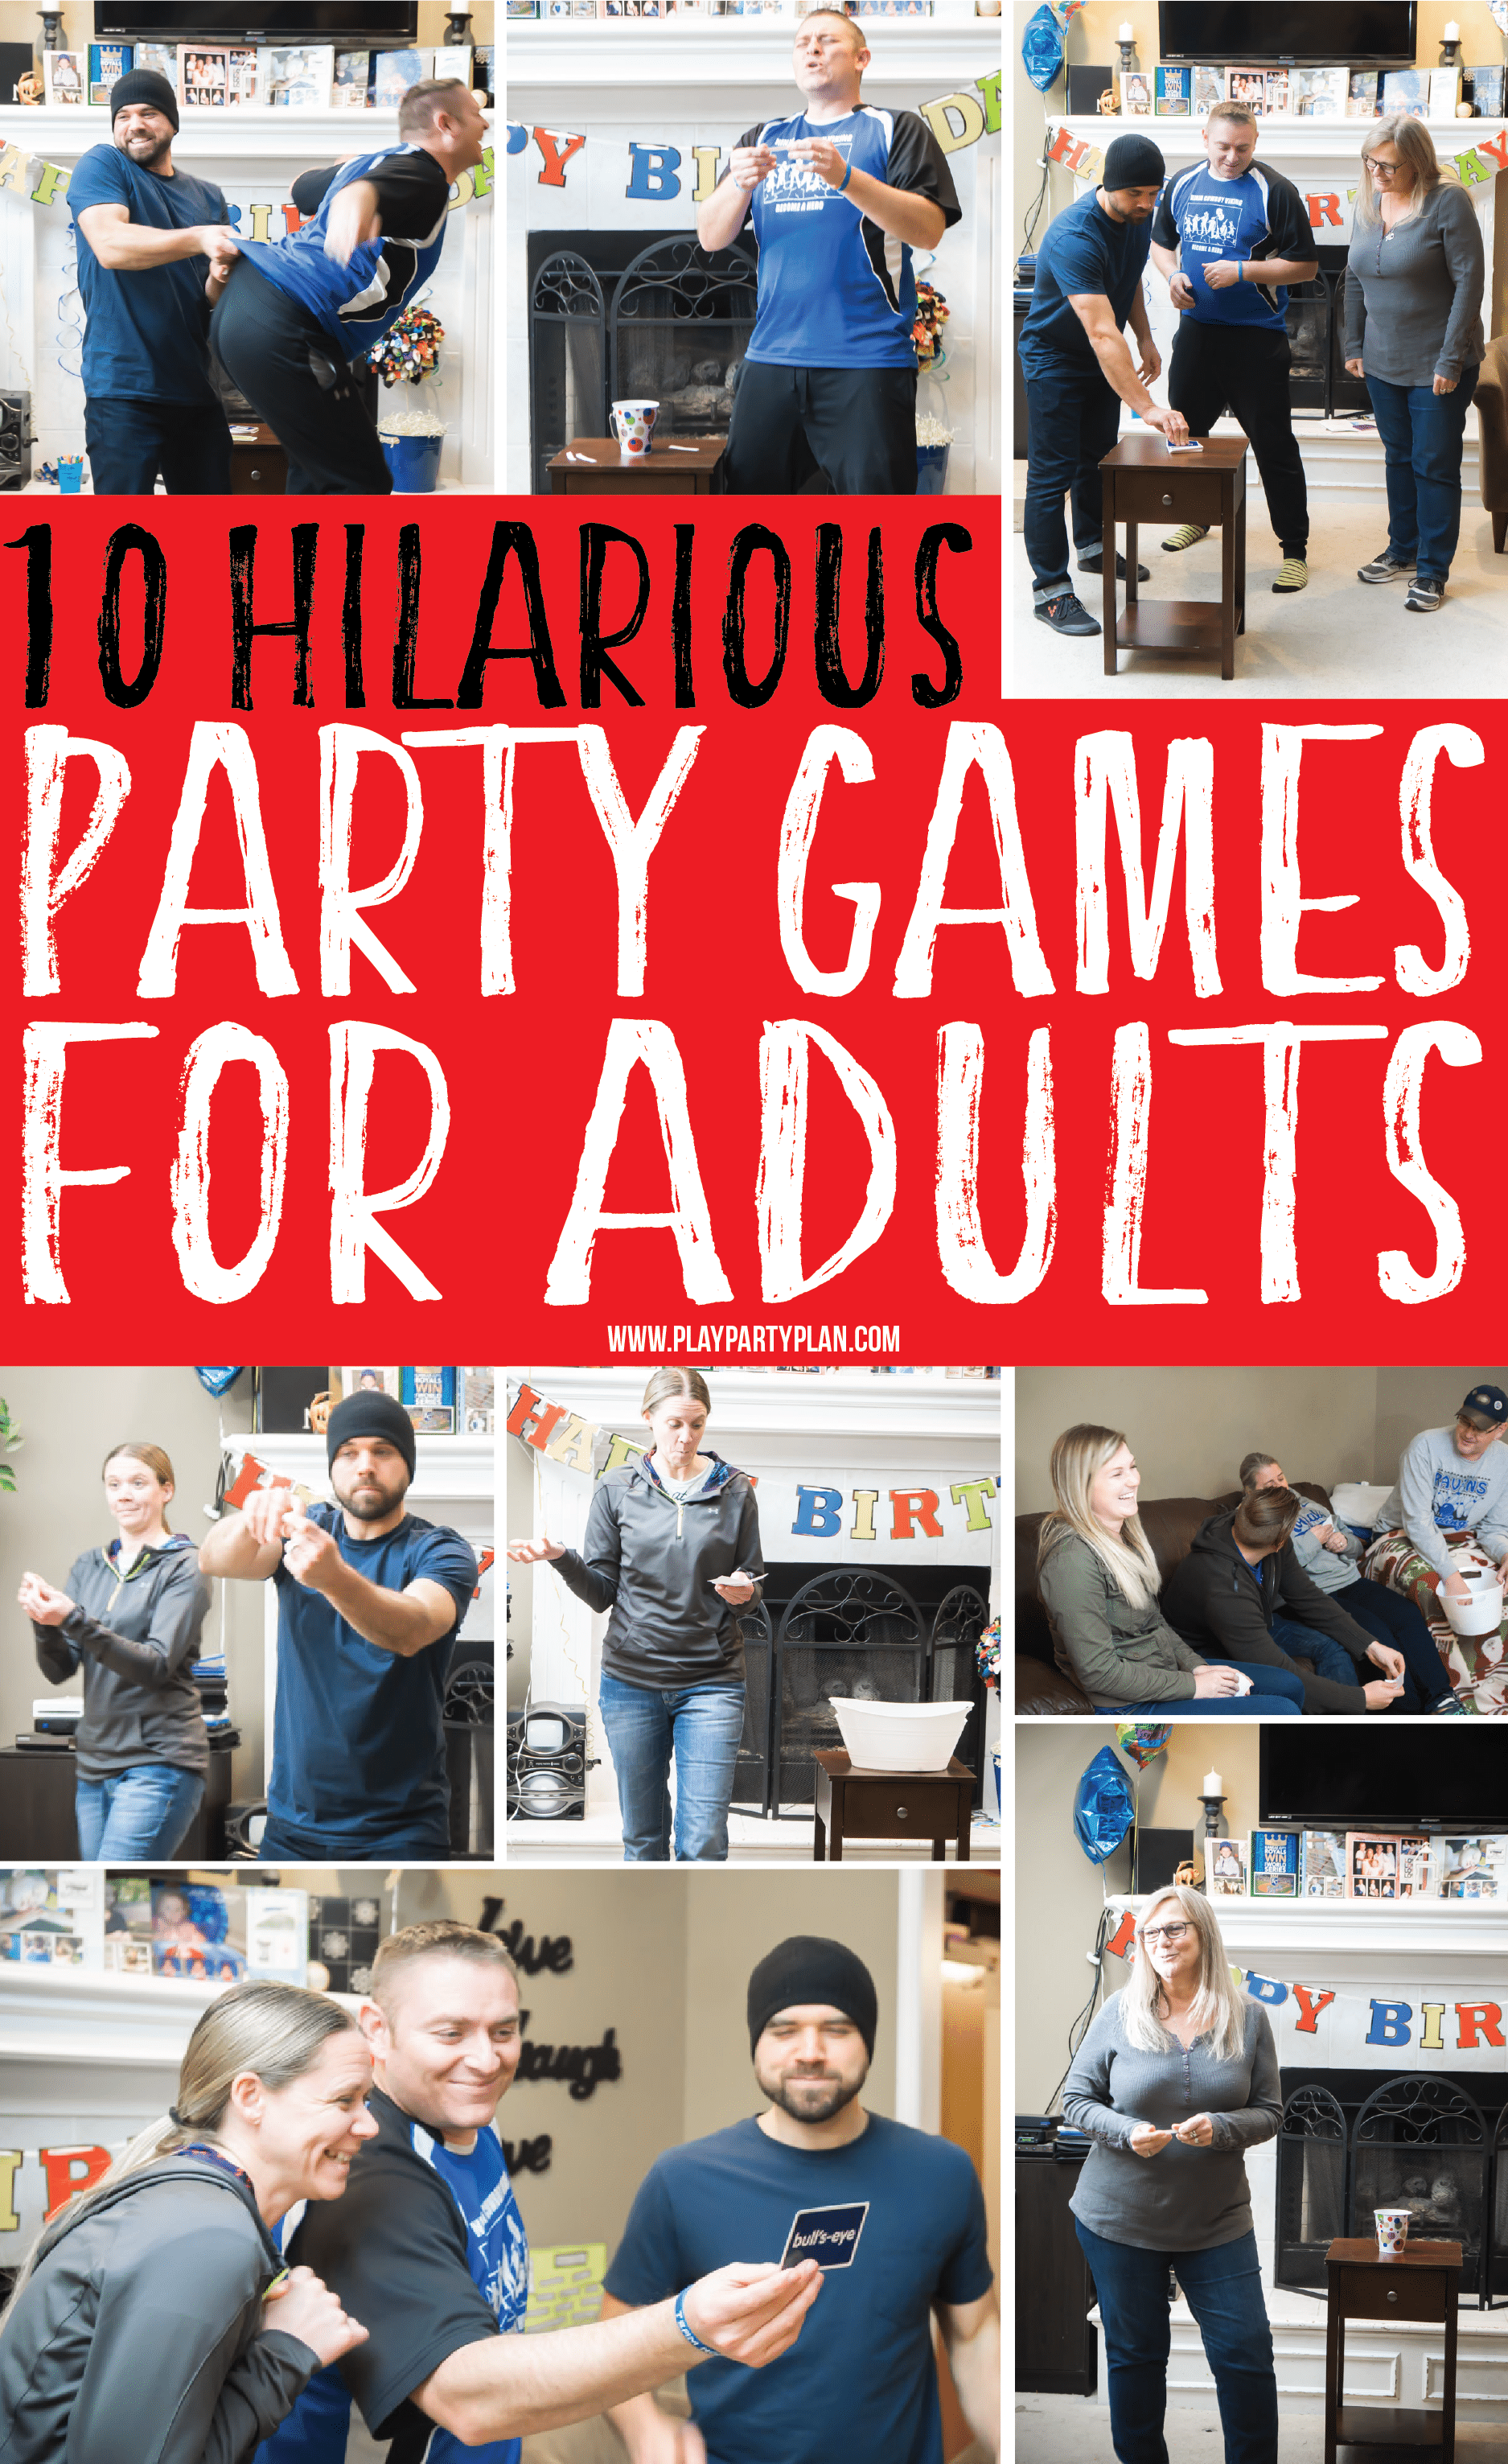 Funny Party Games Ideas For Adults Huskey Raimmake